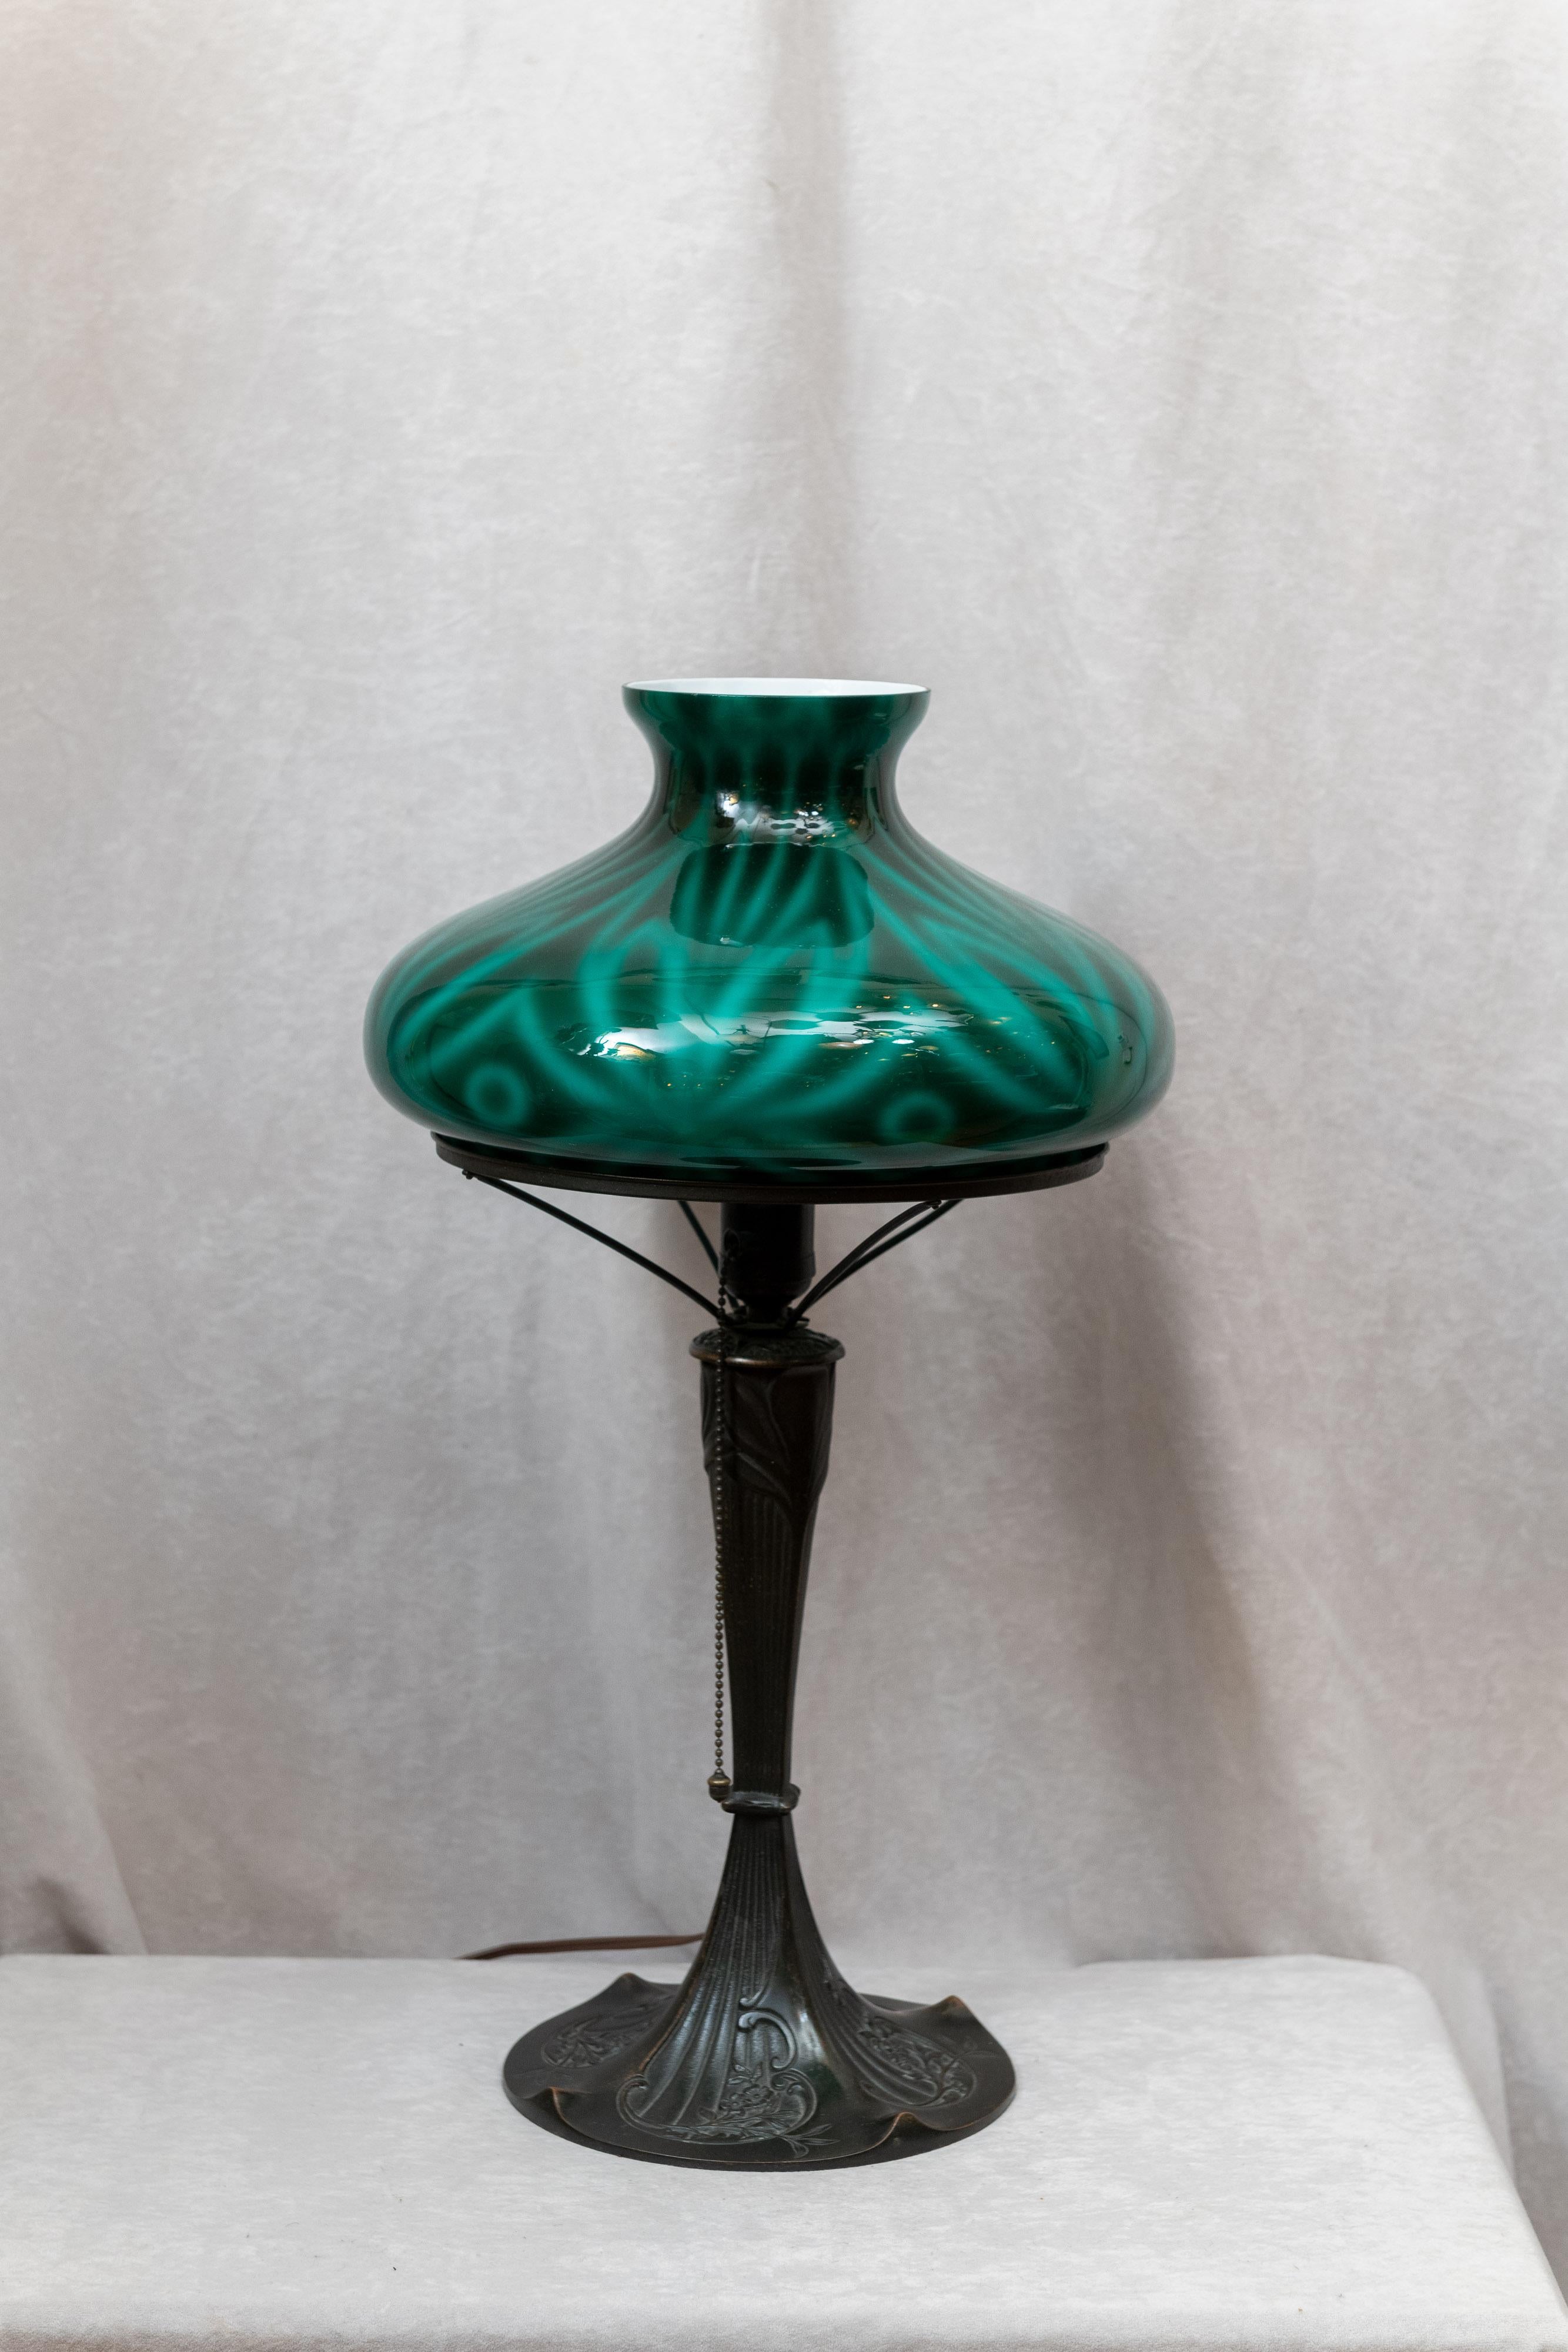 American Art Nouveau Table Lamp with Spider Shade by Emeralite